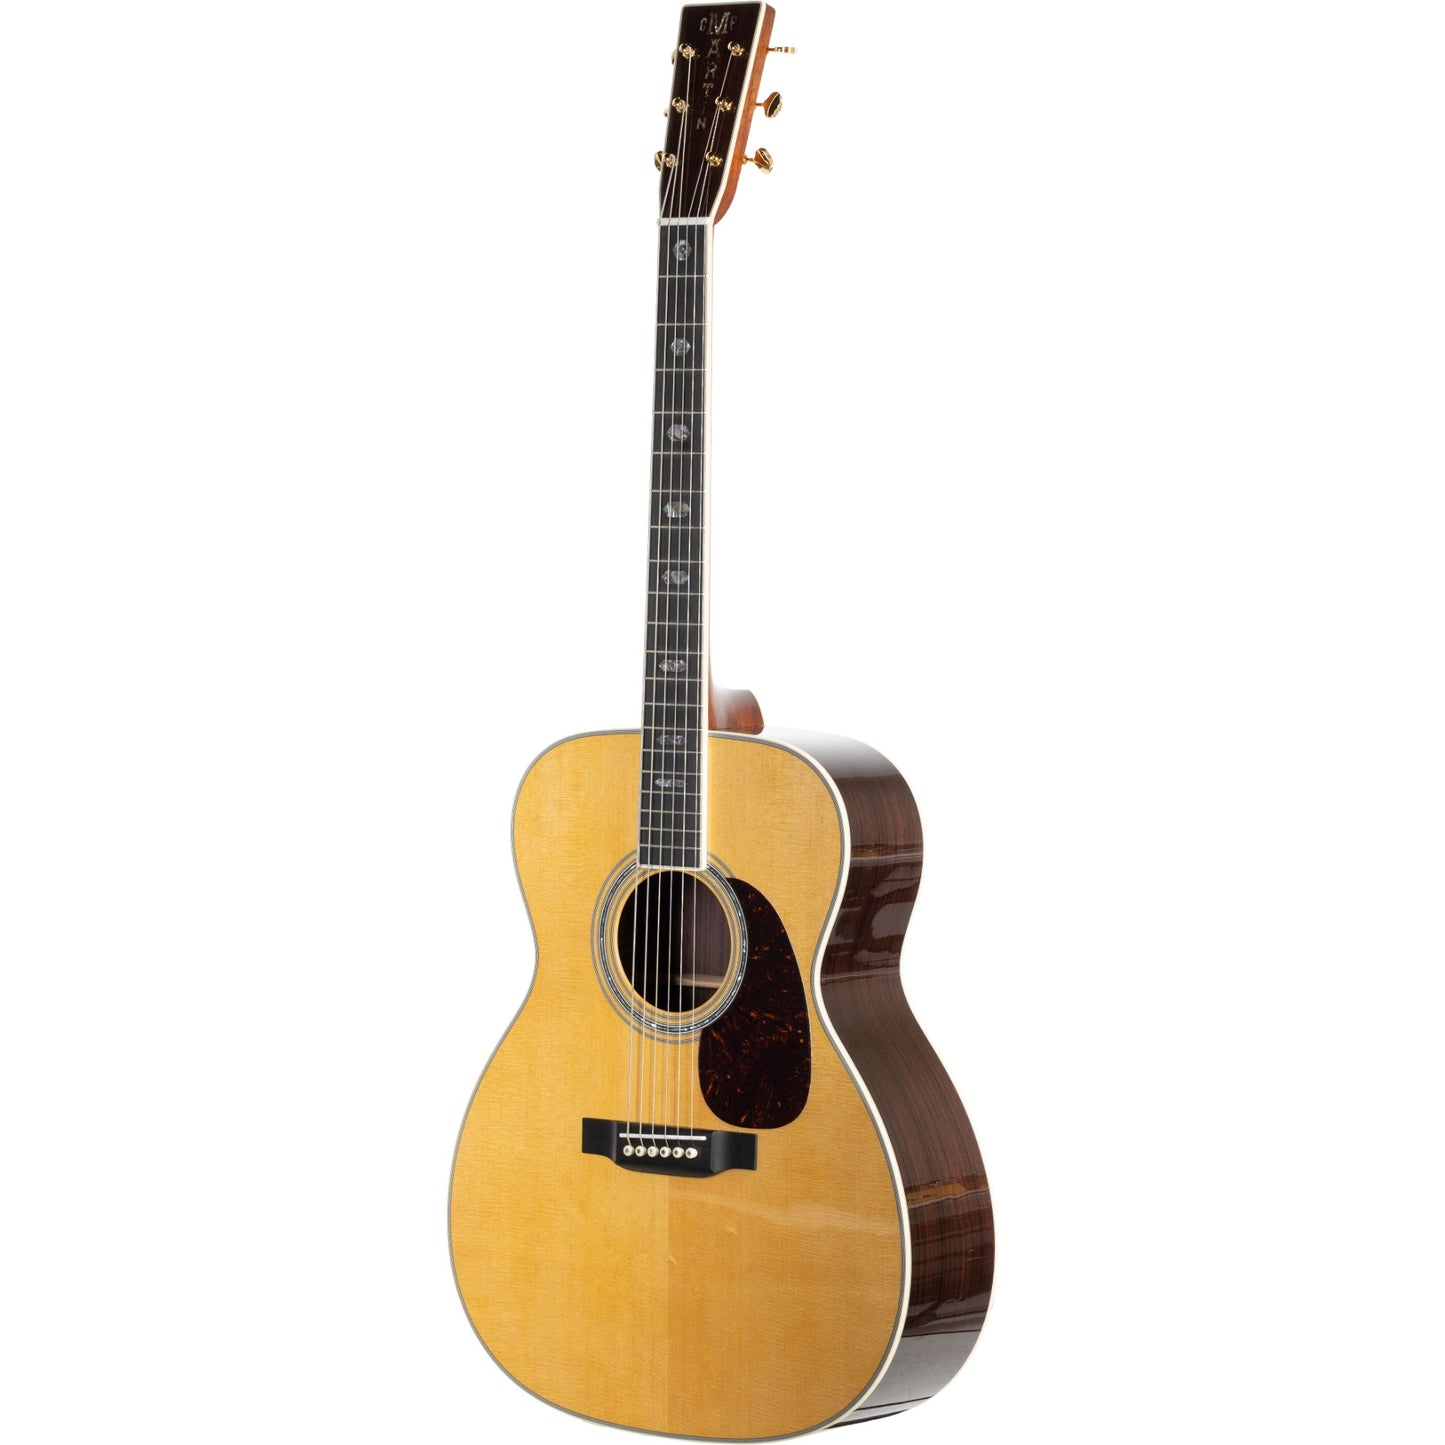 Martin J-40 2018 Standard Series Acoustic Guitar with Case